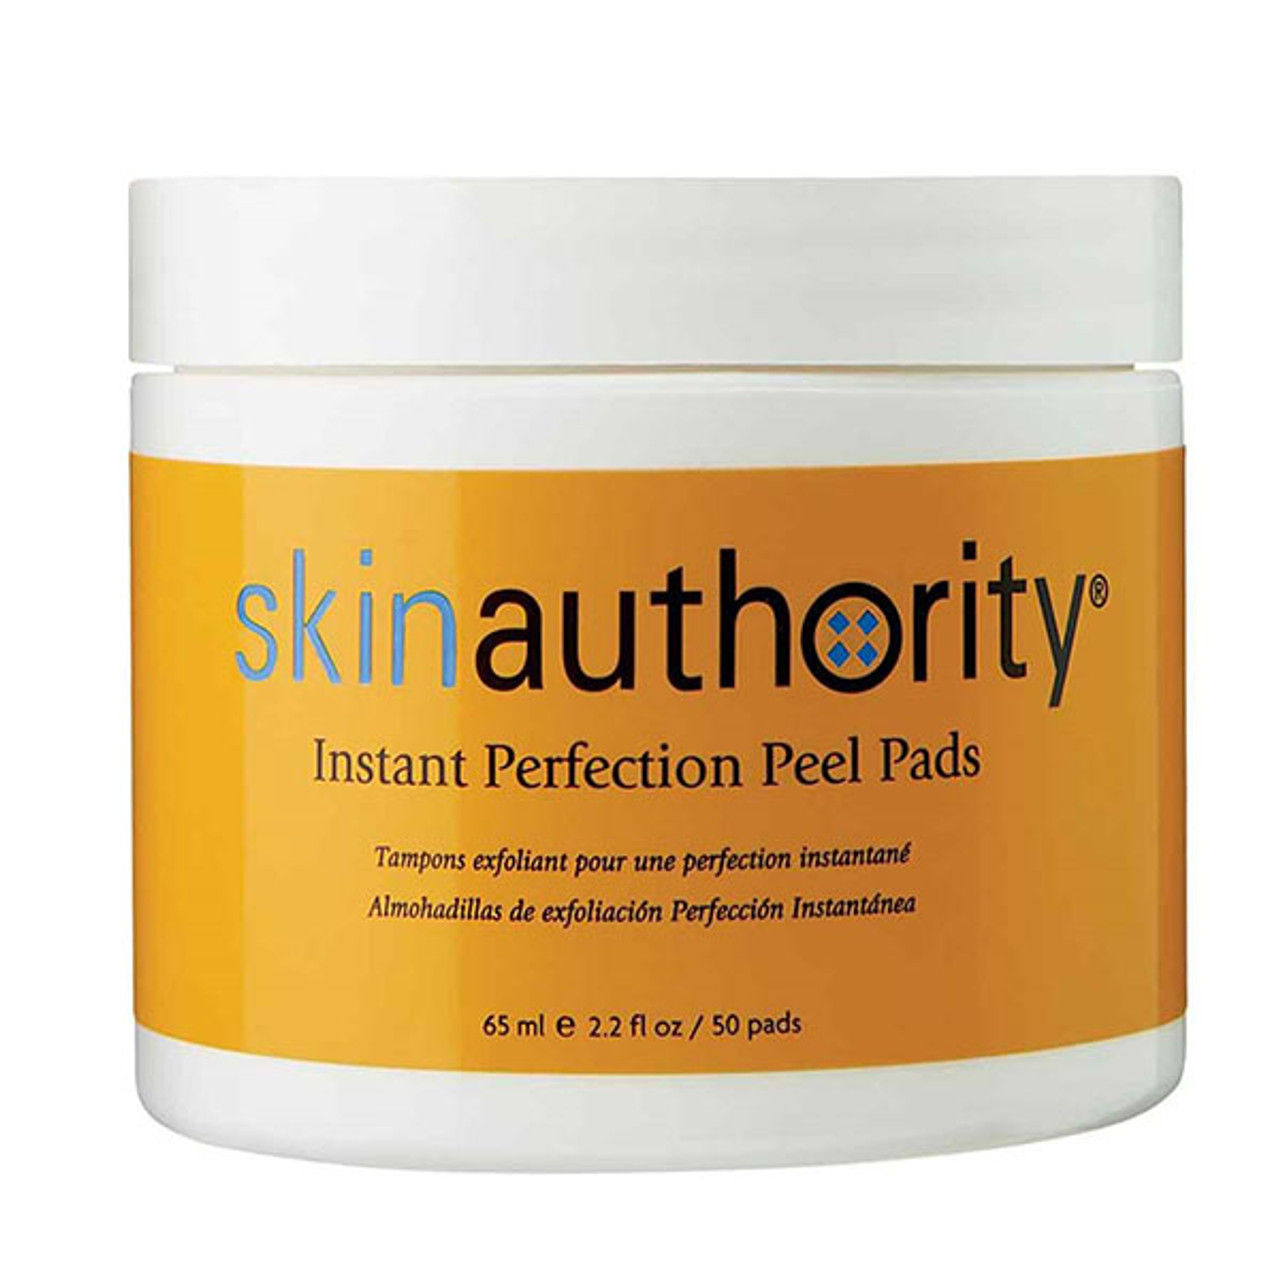 Skin Authority Instant Perfection Peel Pads - 50 pack